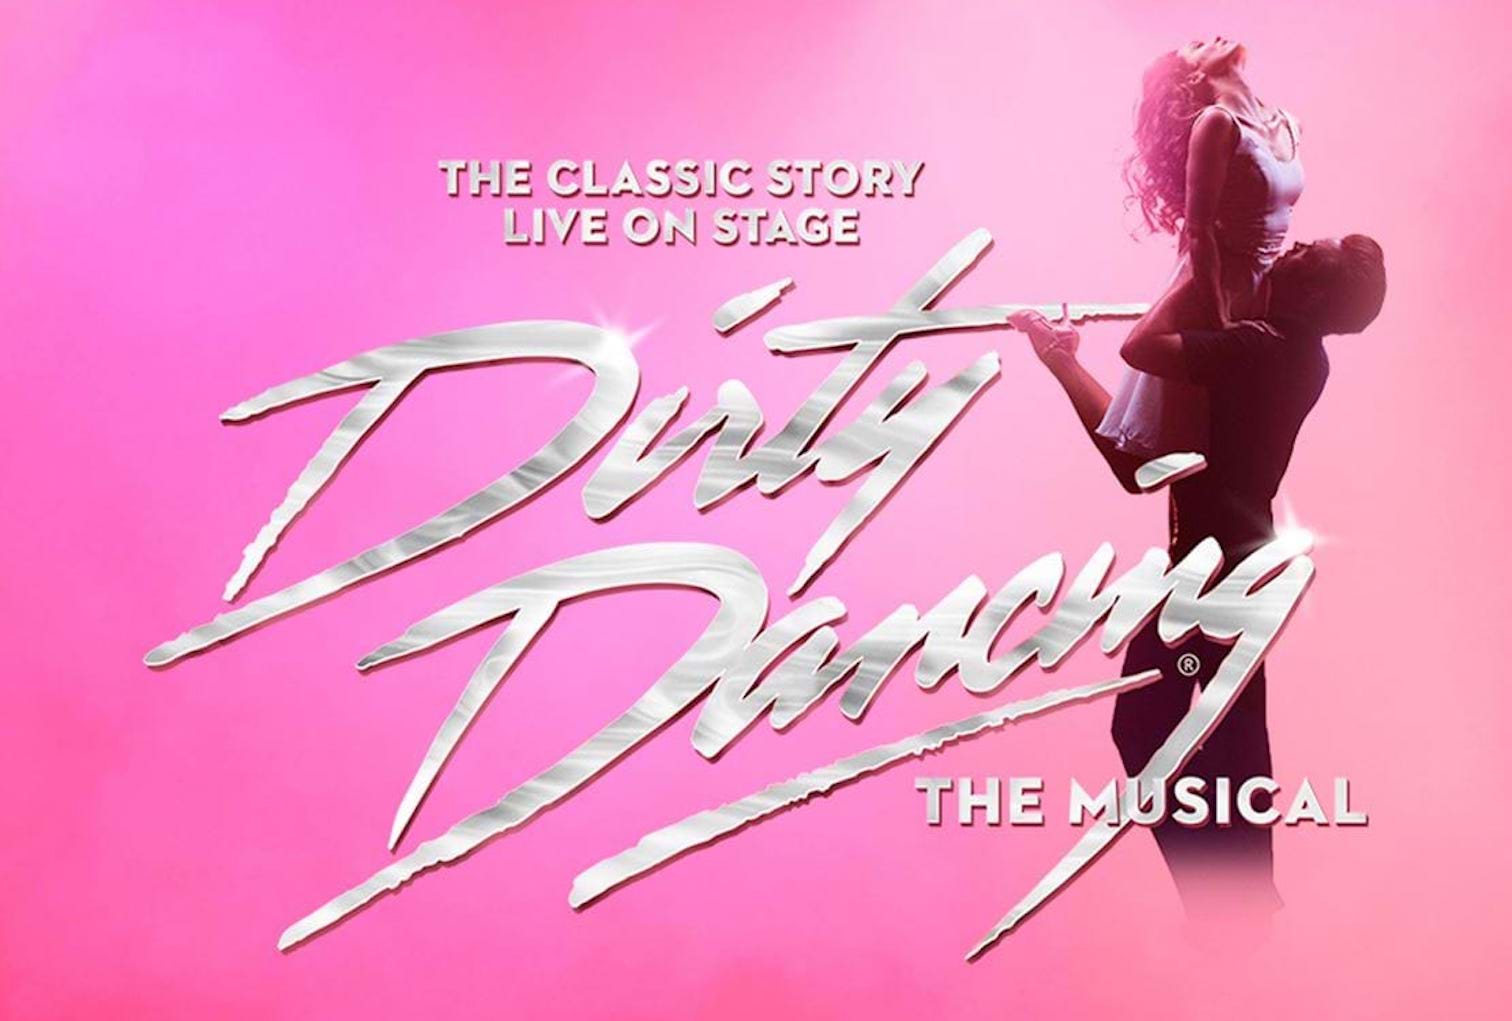 DIRTY DANCING - THE MUSICAL